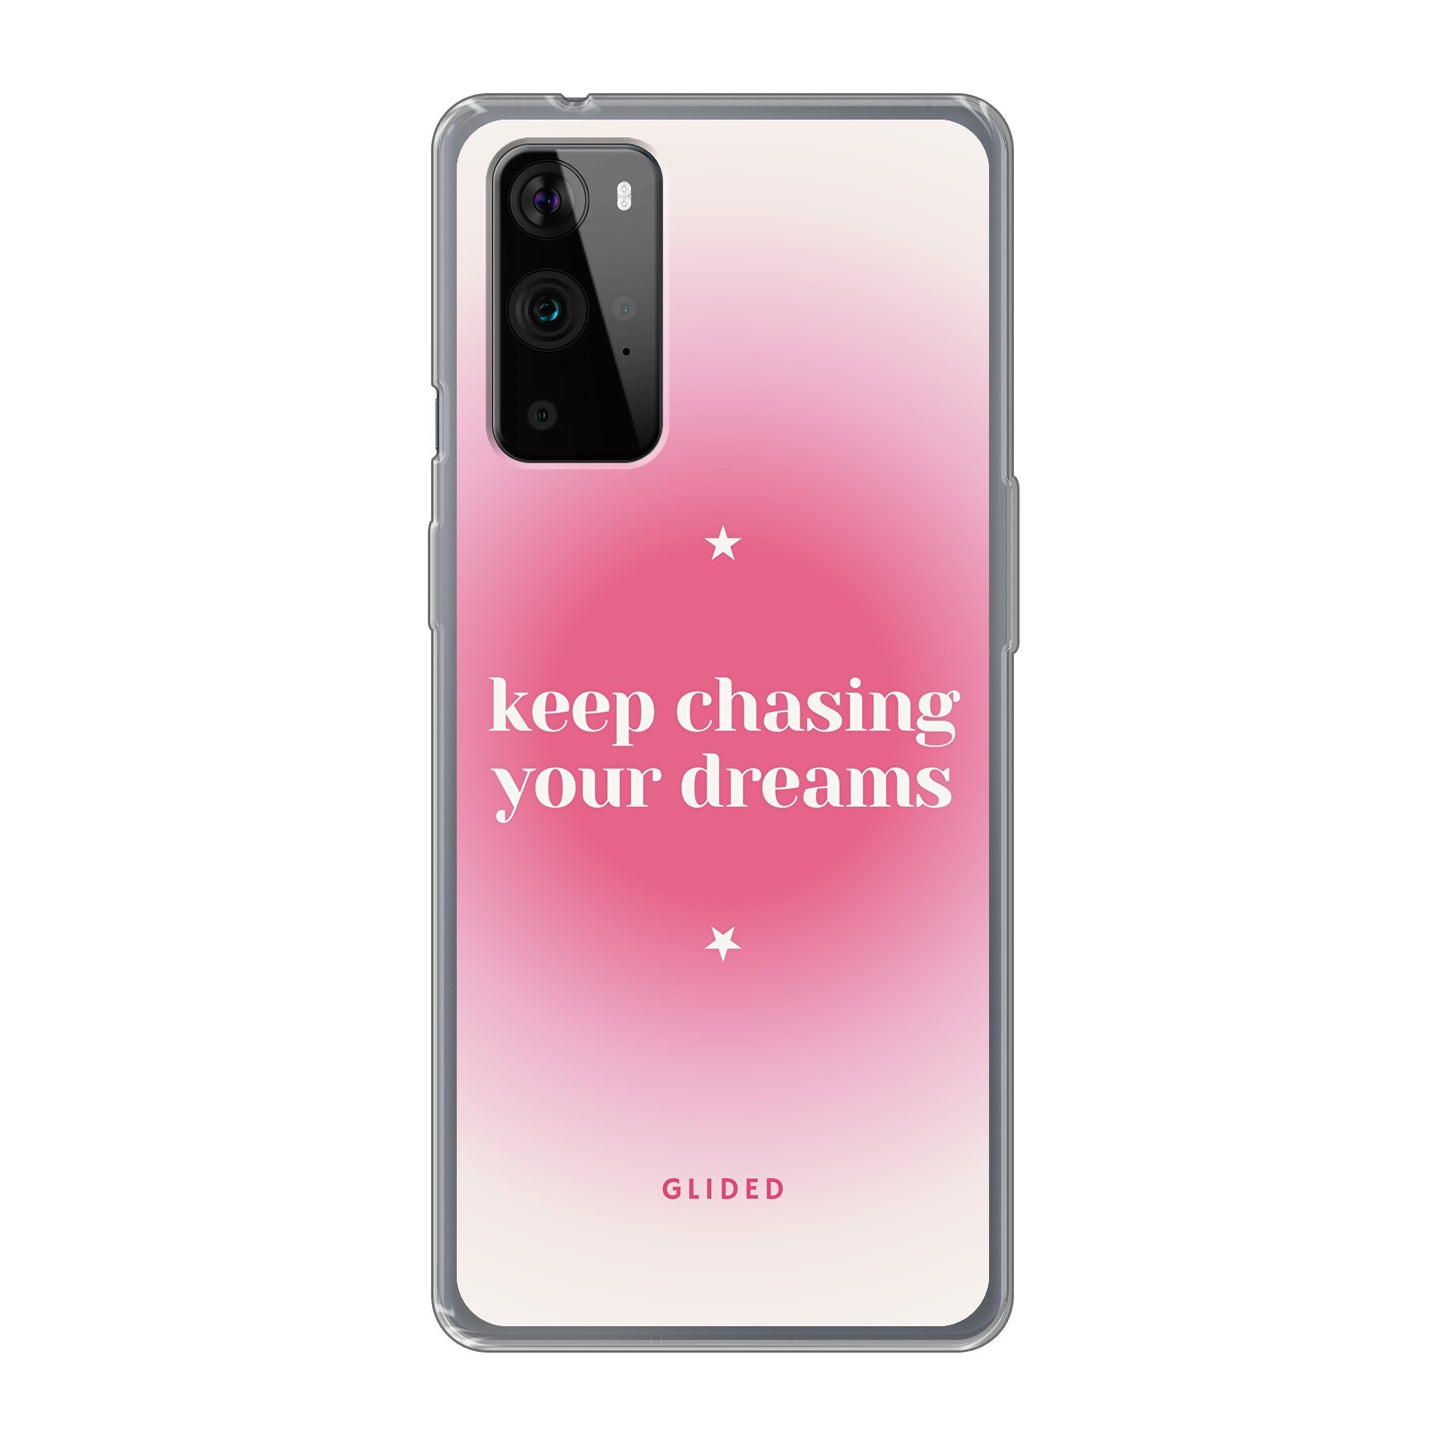 Chasing Dreams - OnePlus 9 Pro Handyhülle Soft case